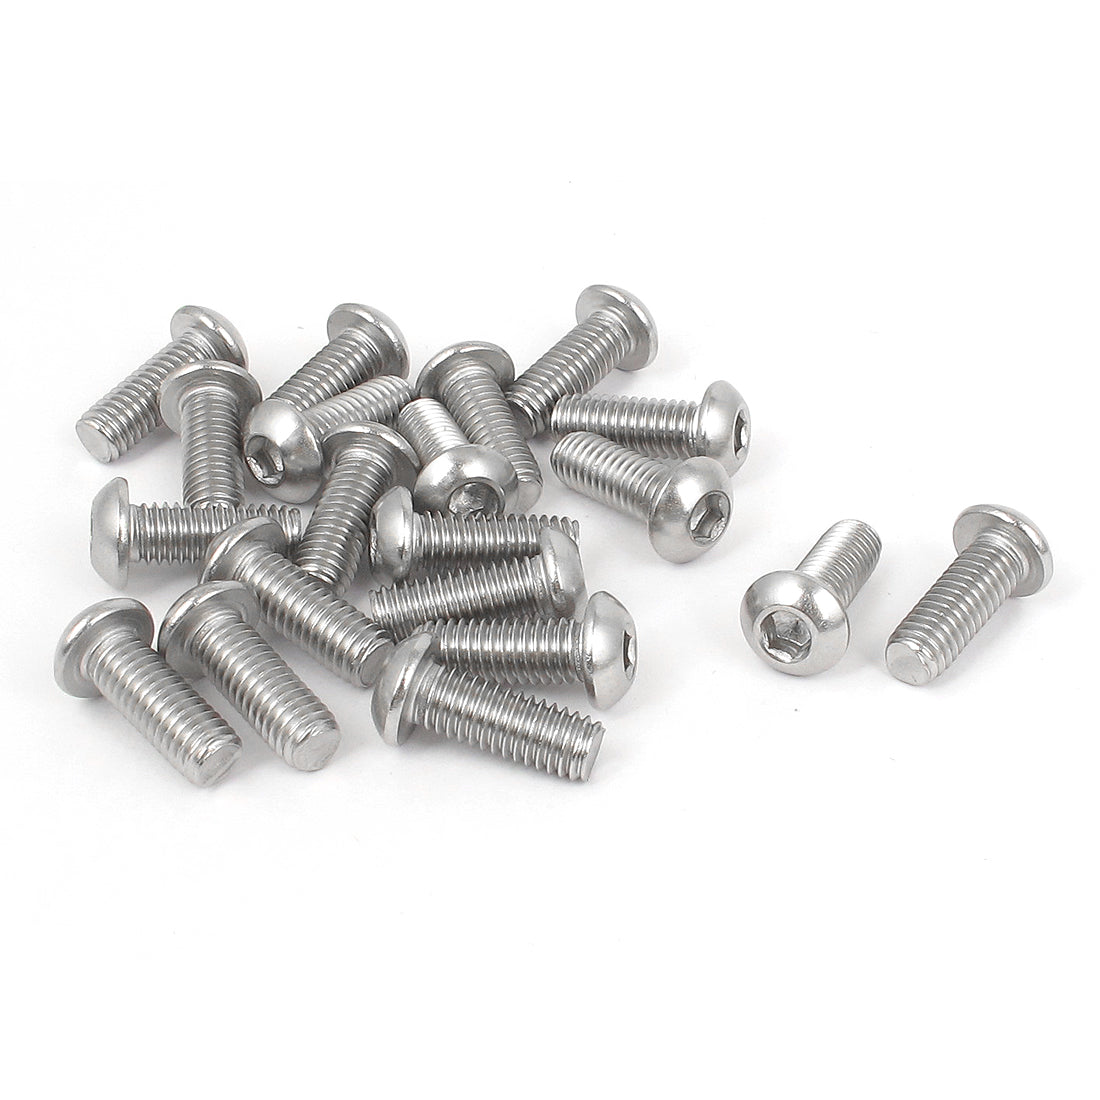 uxcell Uxcell M6x16mm Stainless Steel Hex Socket Machine Countersunk Round Head Bolts 20PCS